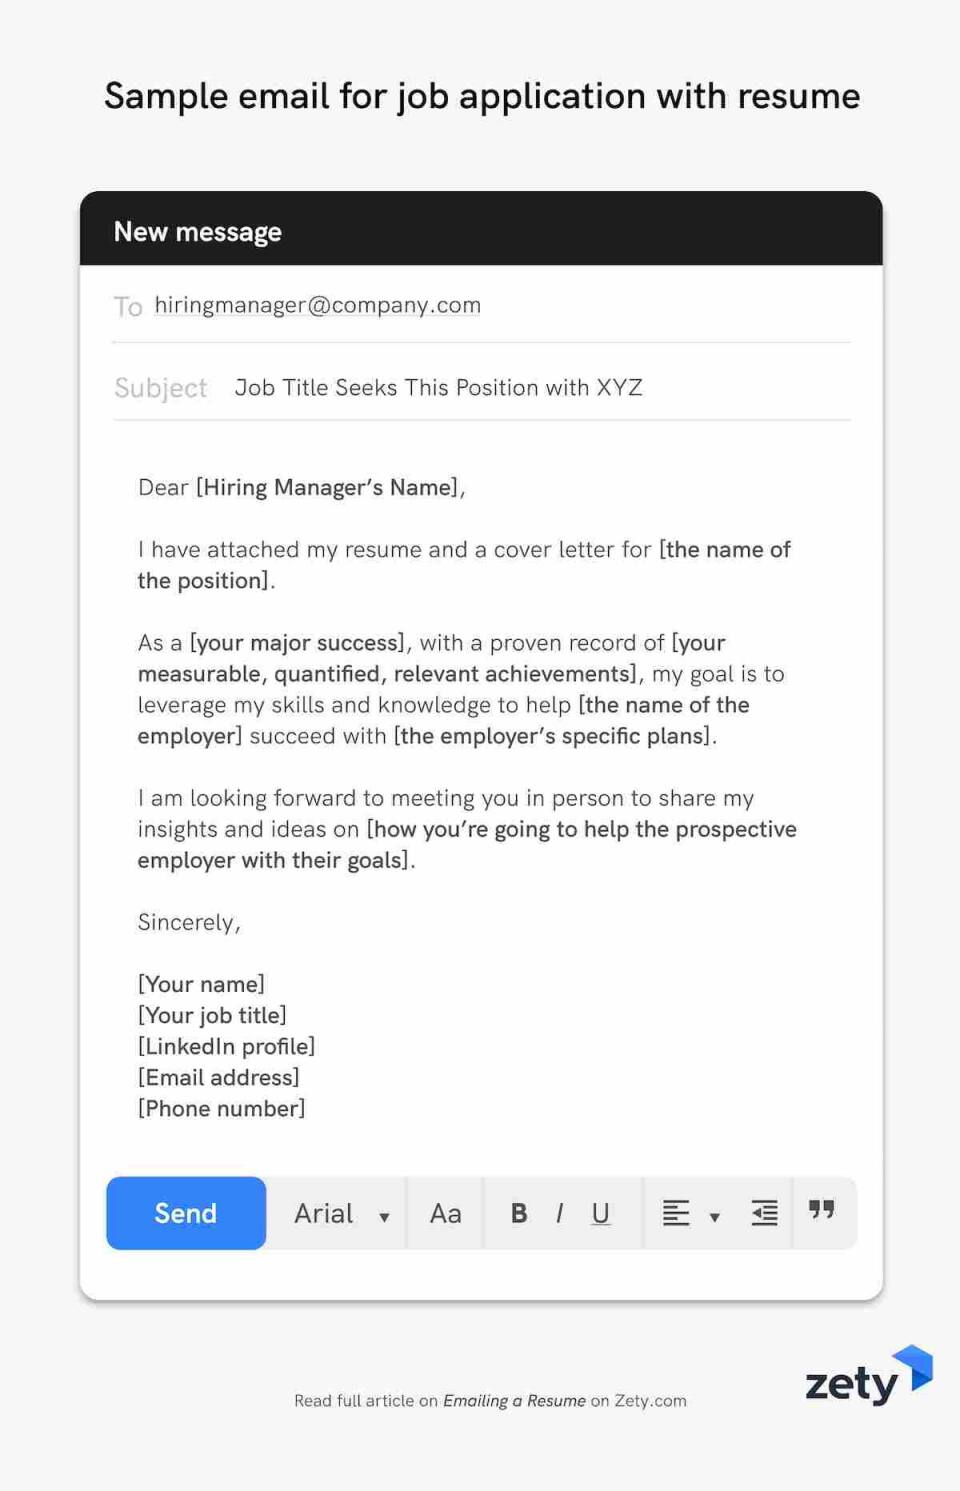 how to send email for applying a job example